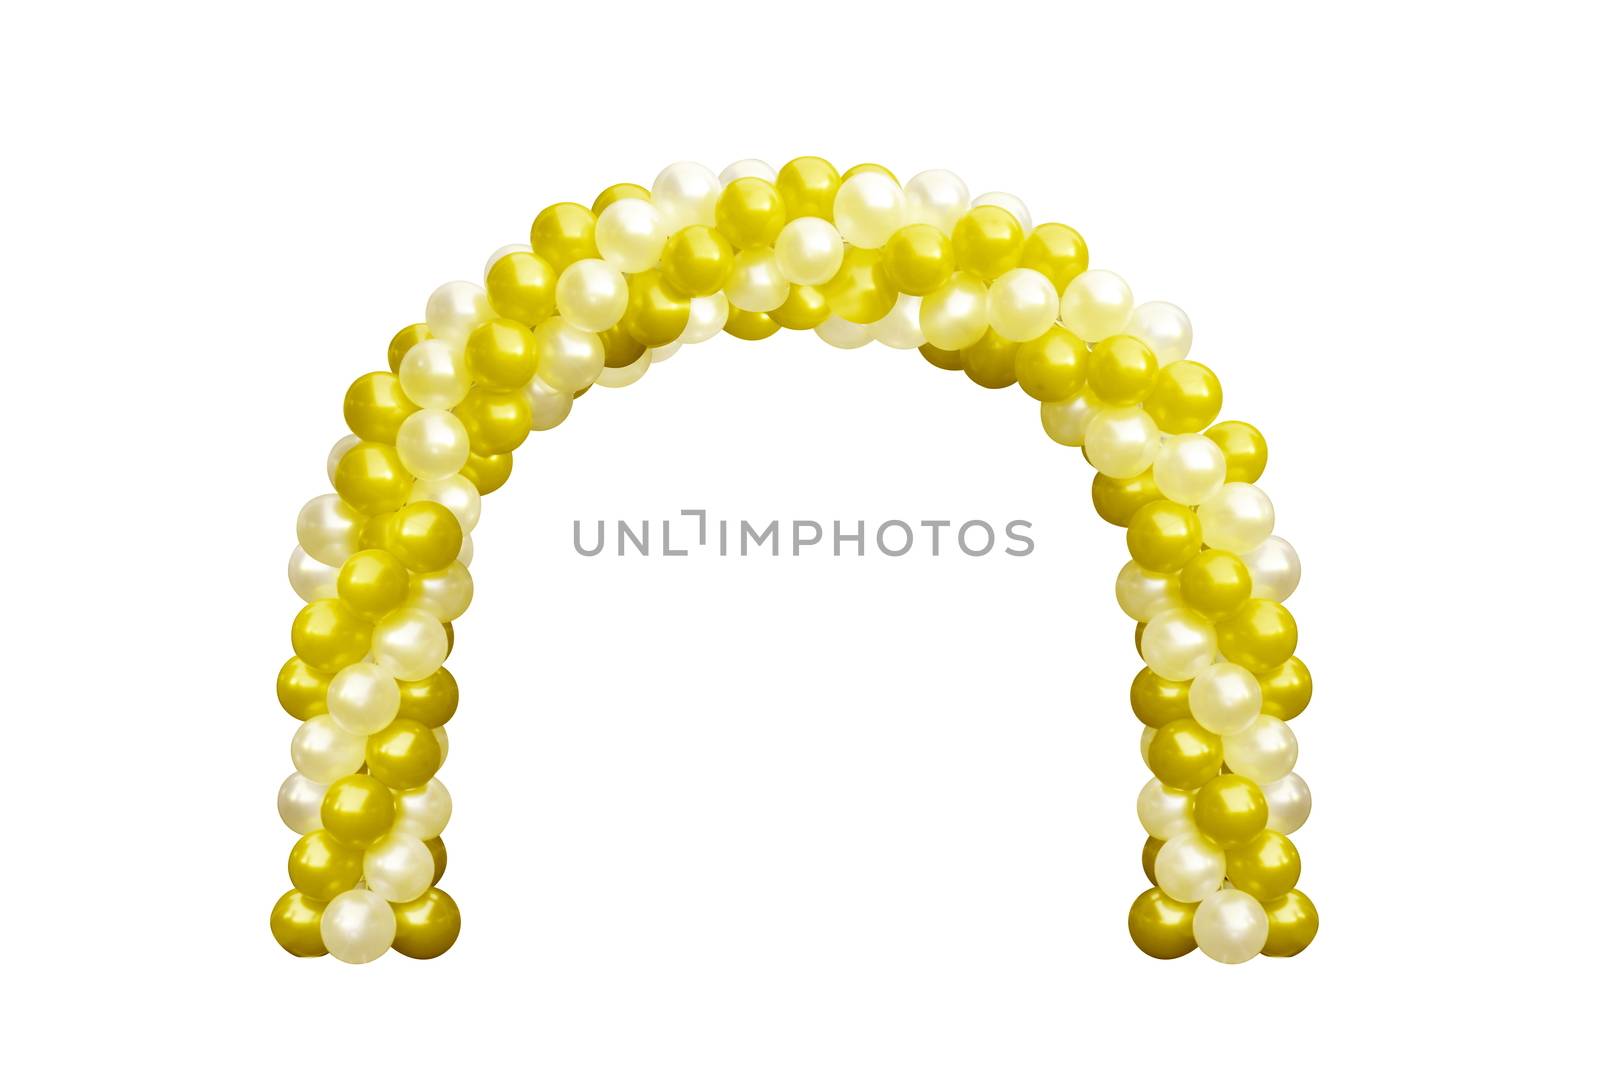 Balloon Archway door Yellow Gold and white, Arches wedding, Balloon Festival design decoration elements with arch floral design isolated on white Background by cgdeaw